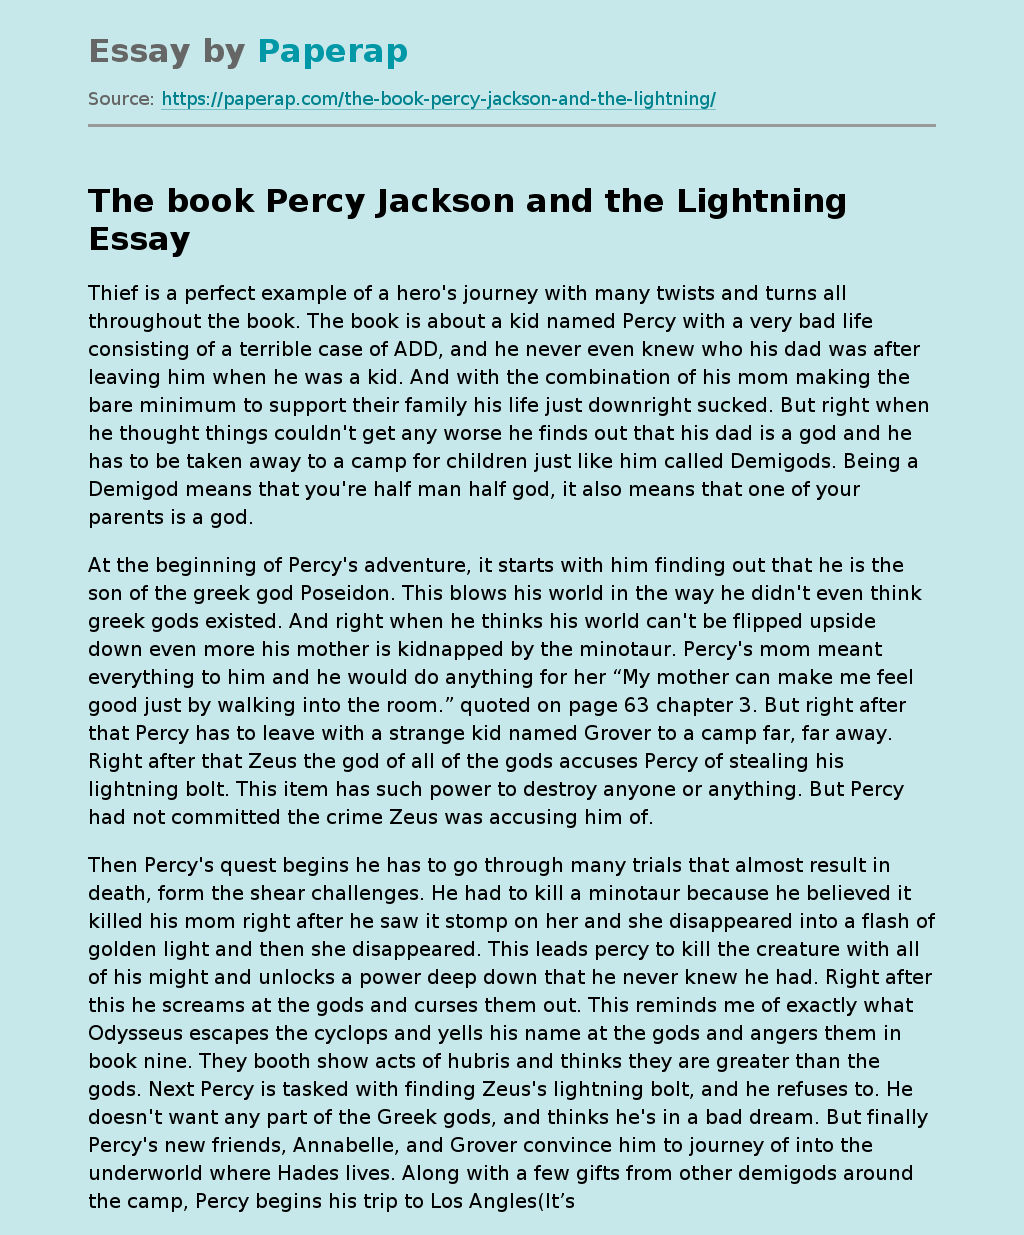 The book Percy Jackson and the Lightning